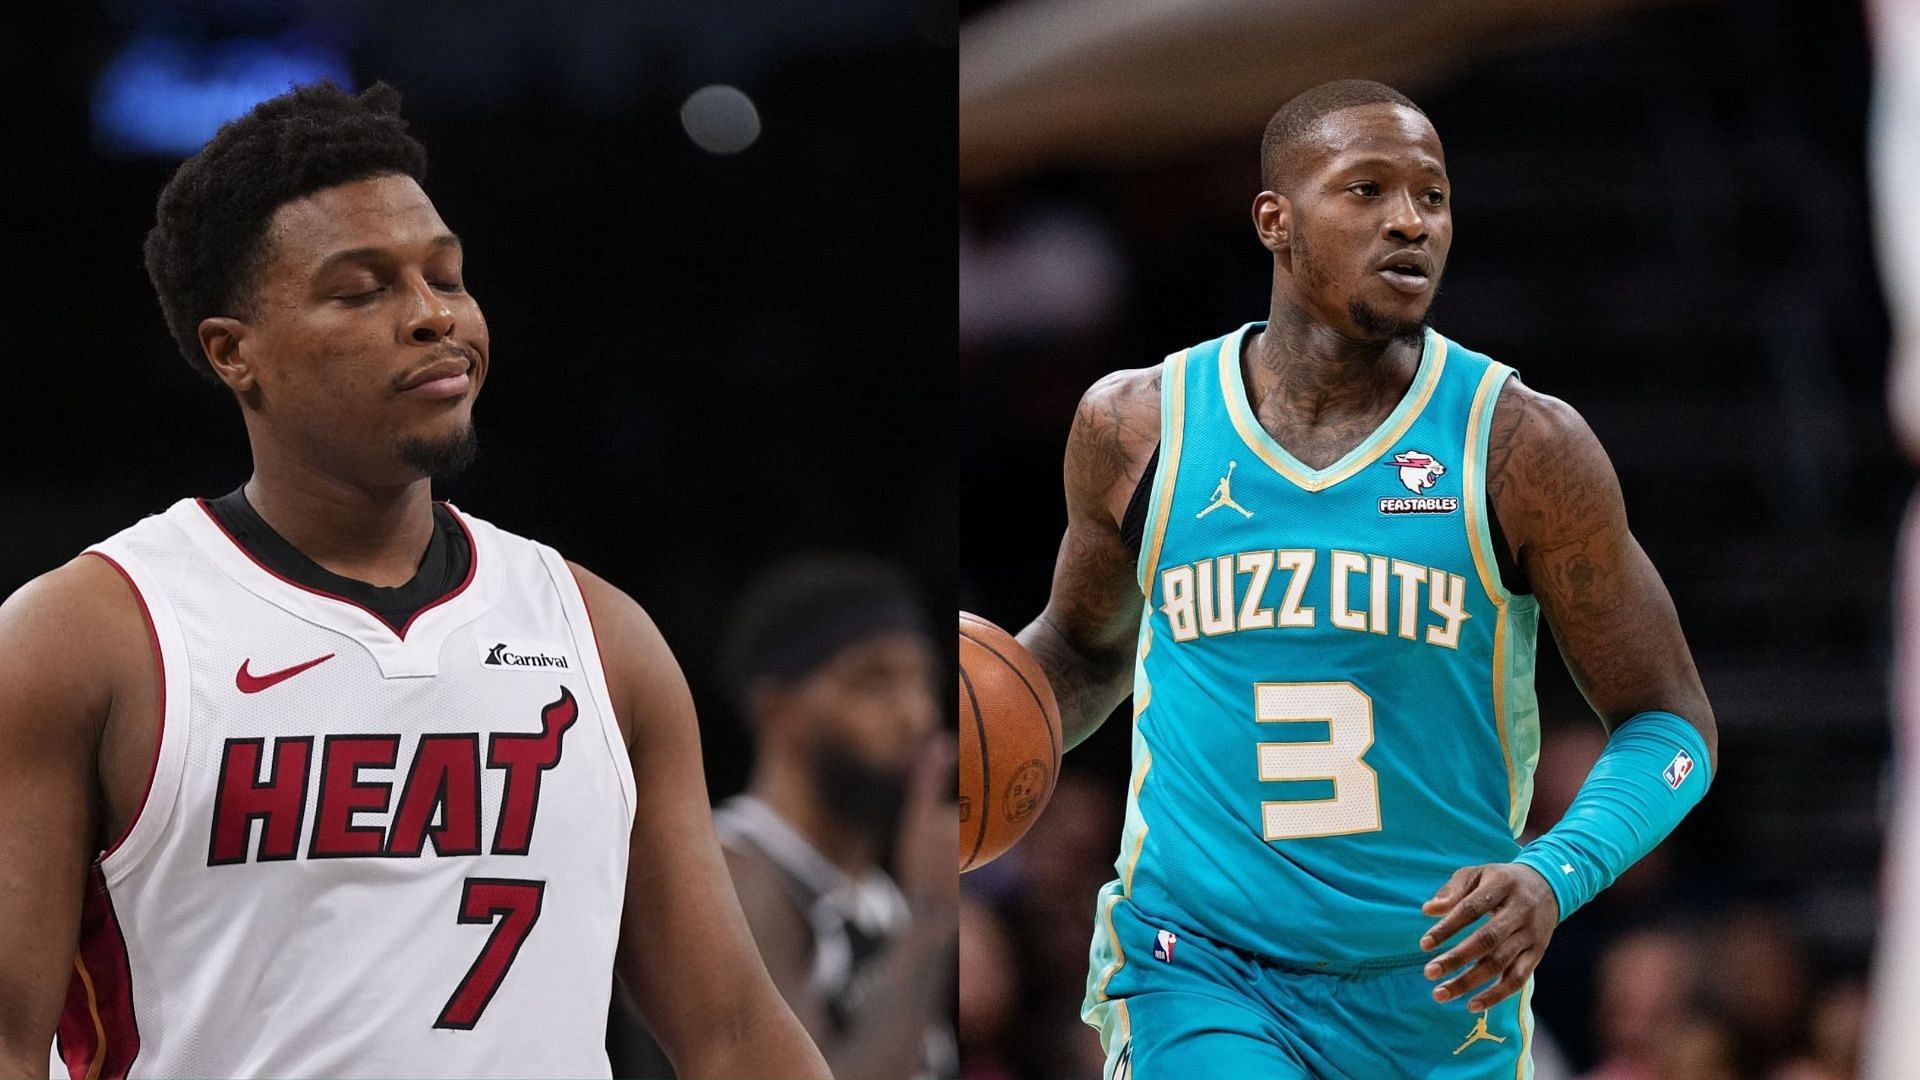 The Miami Heat traded Kyle Lowry to the Charlotte Hornets for Terry Rozier